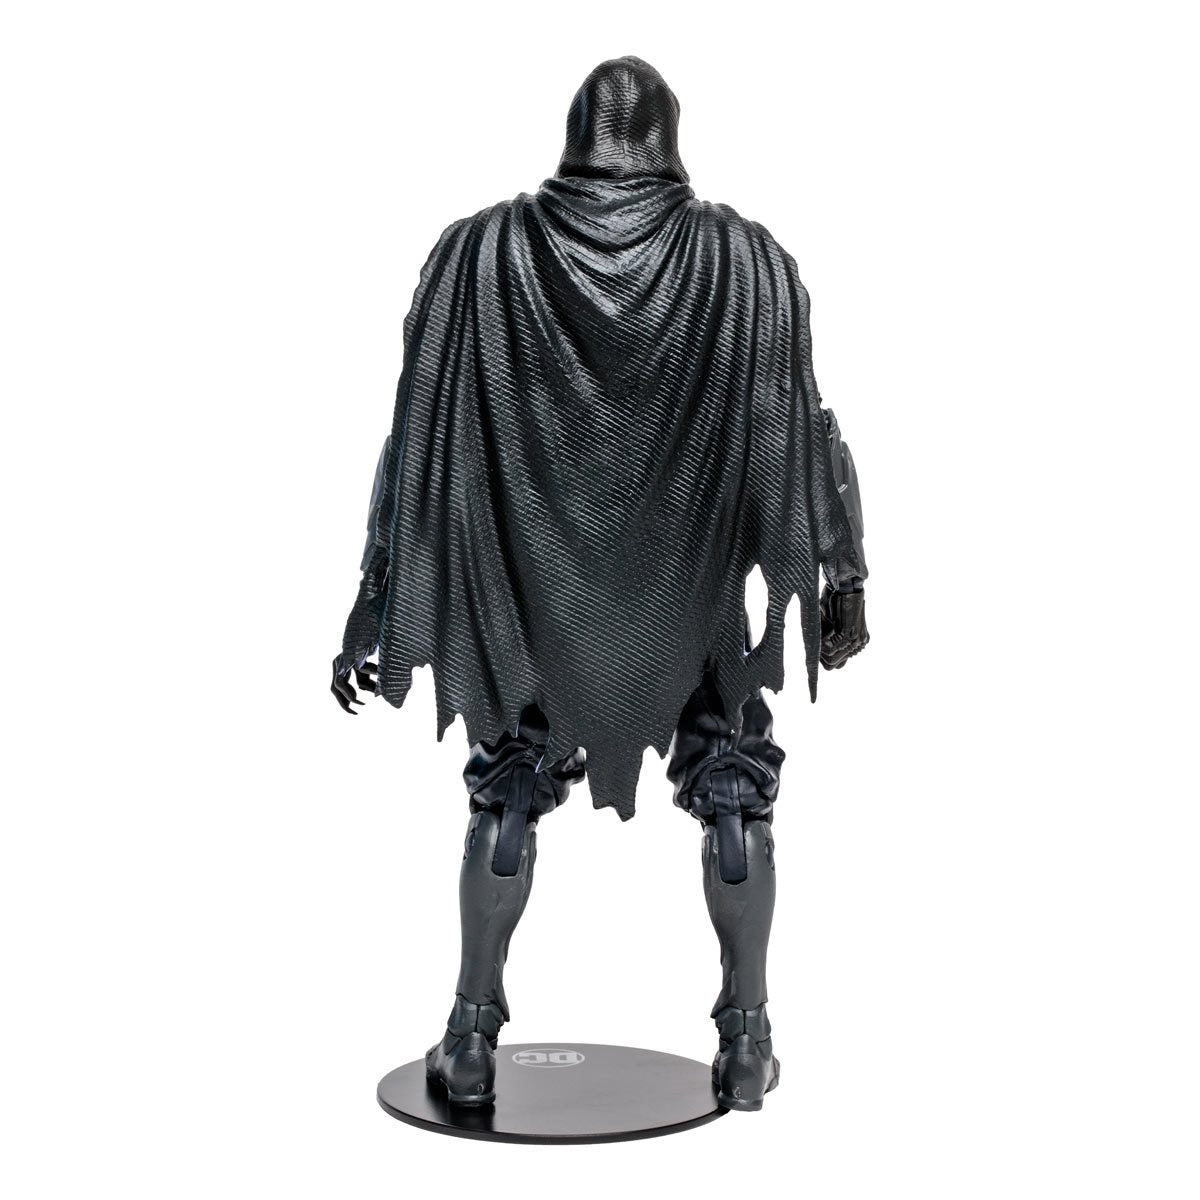 Abyss Batman vs. Abyss 7-Inch Scale Action Figure back pose - heretoserveyou